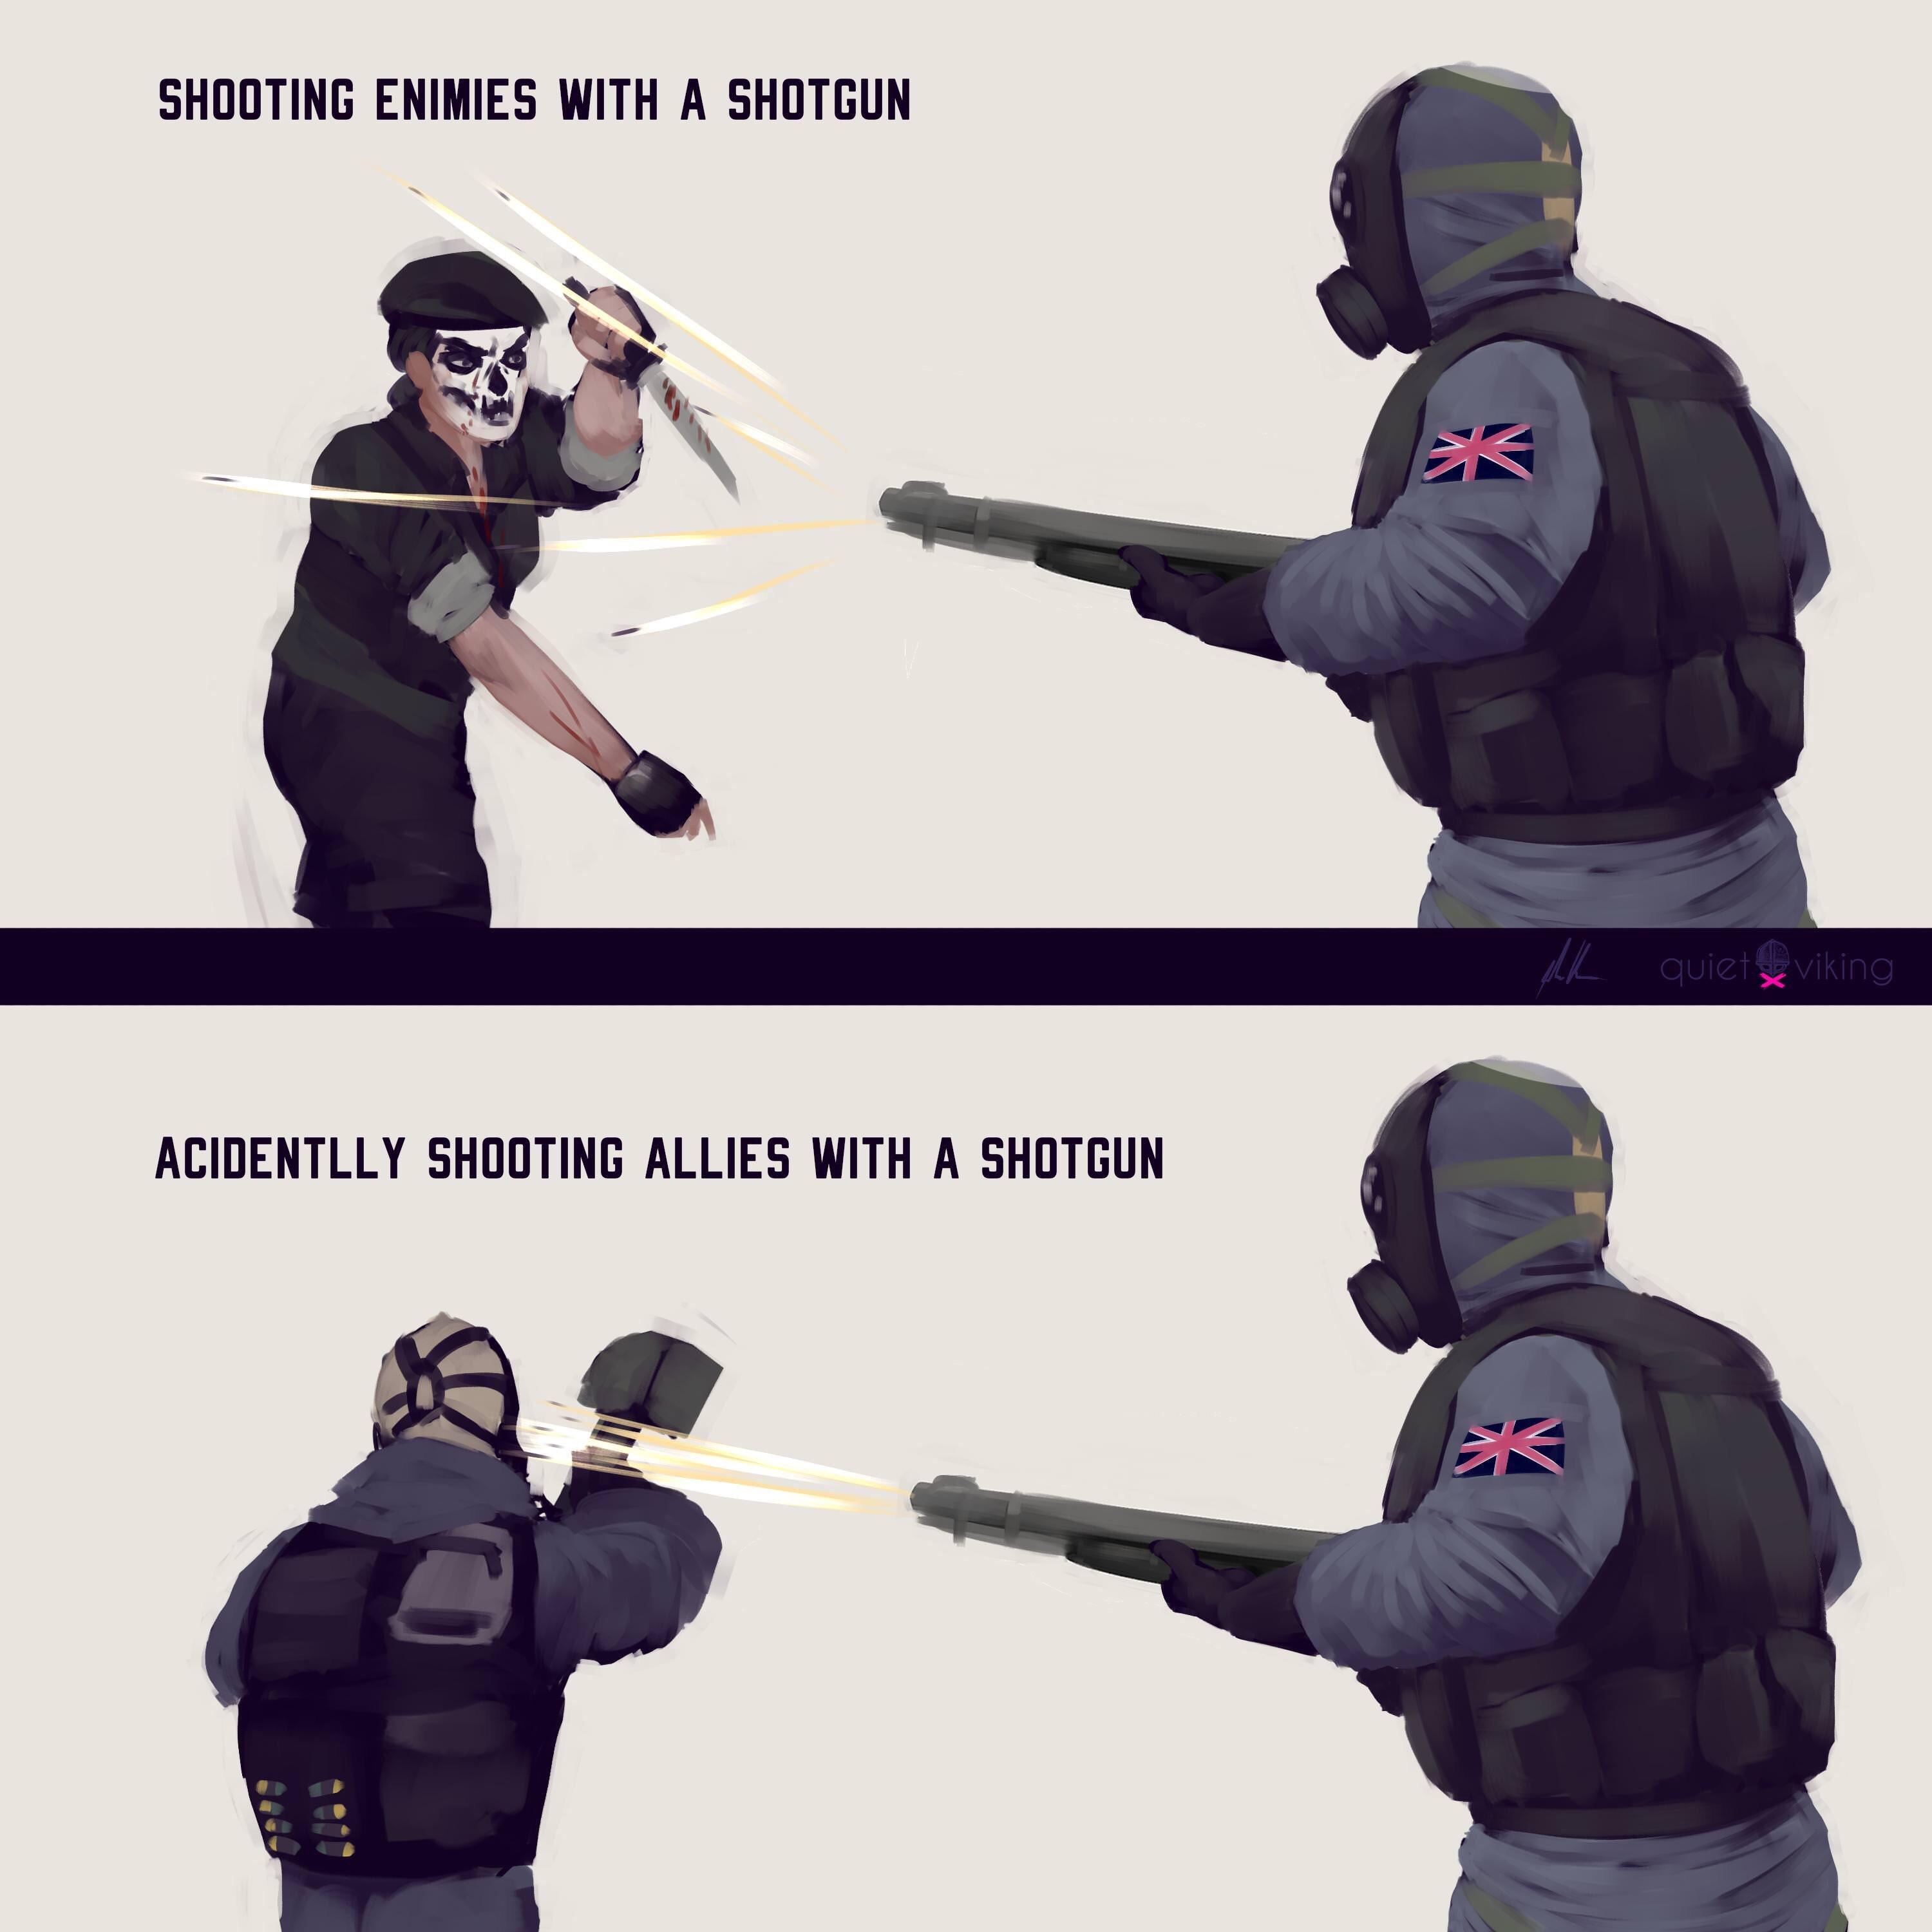 best r6 memes of all time - Shooting Enimies With A Shotgun L quiet viking Acidentlly Shooting Allies With A Shotgun